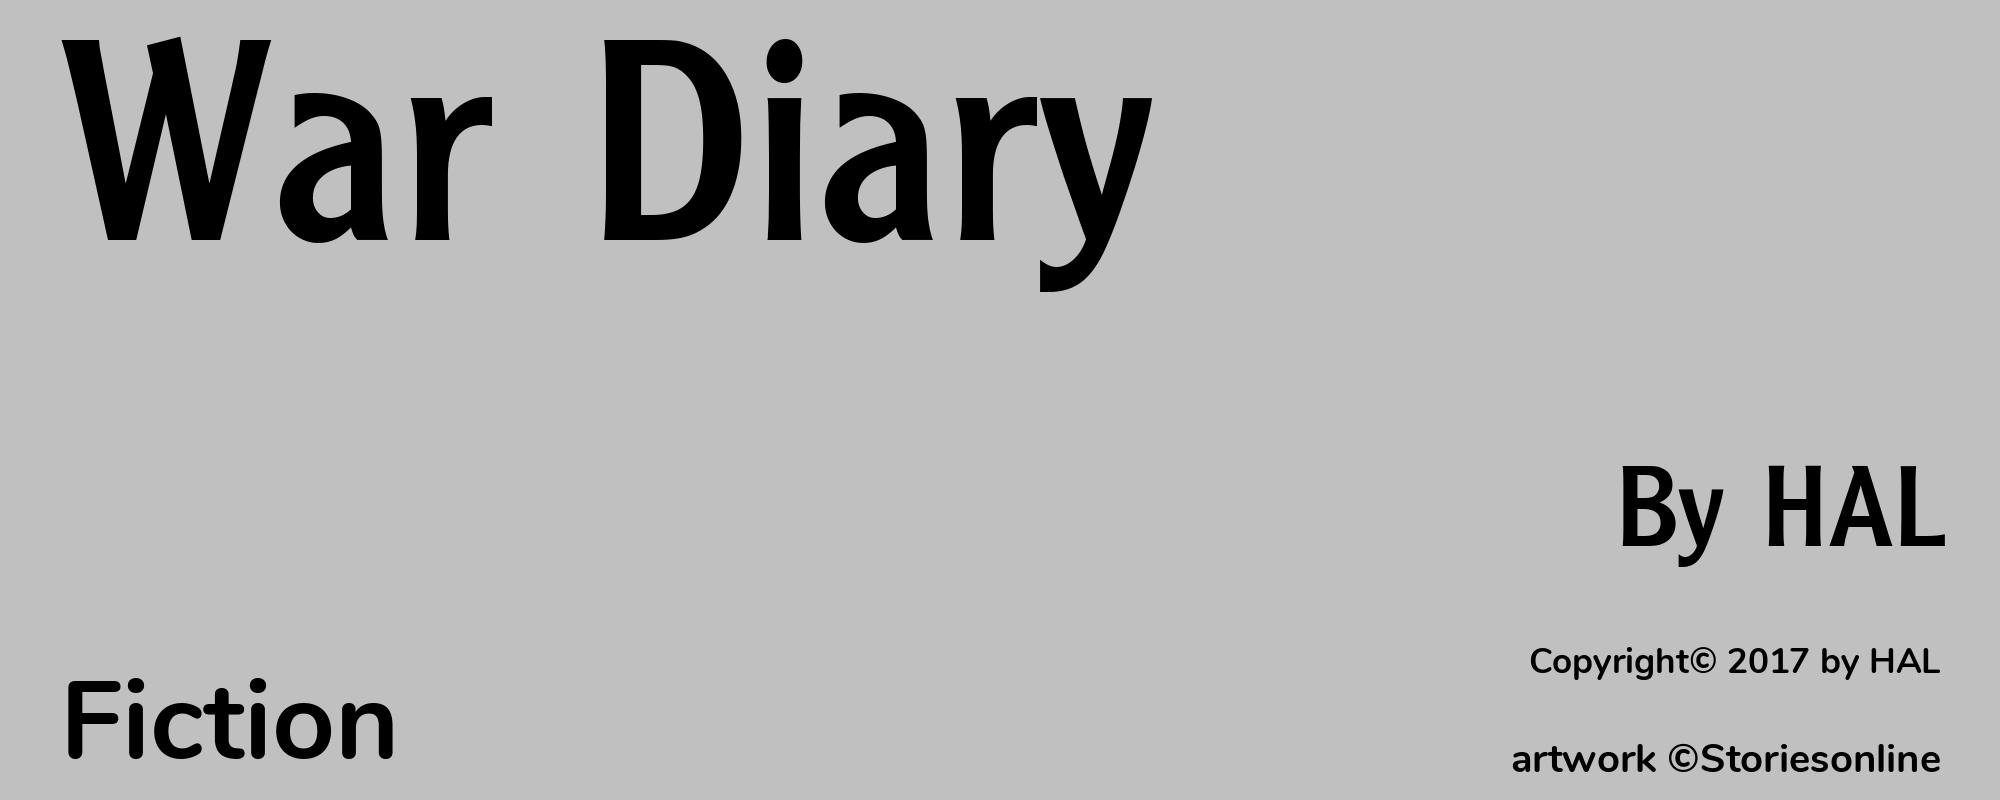 War Diary - Cover